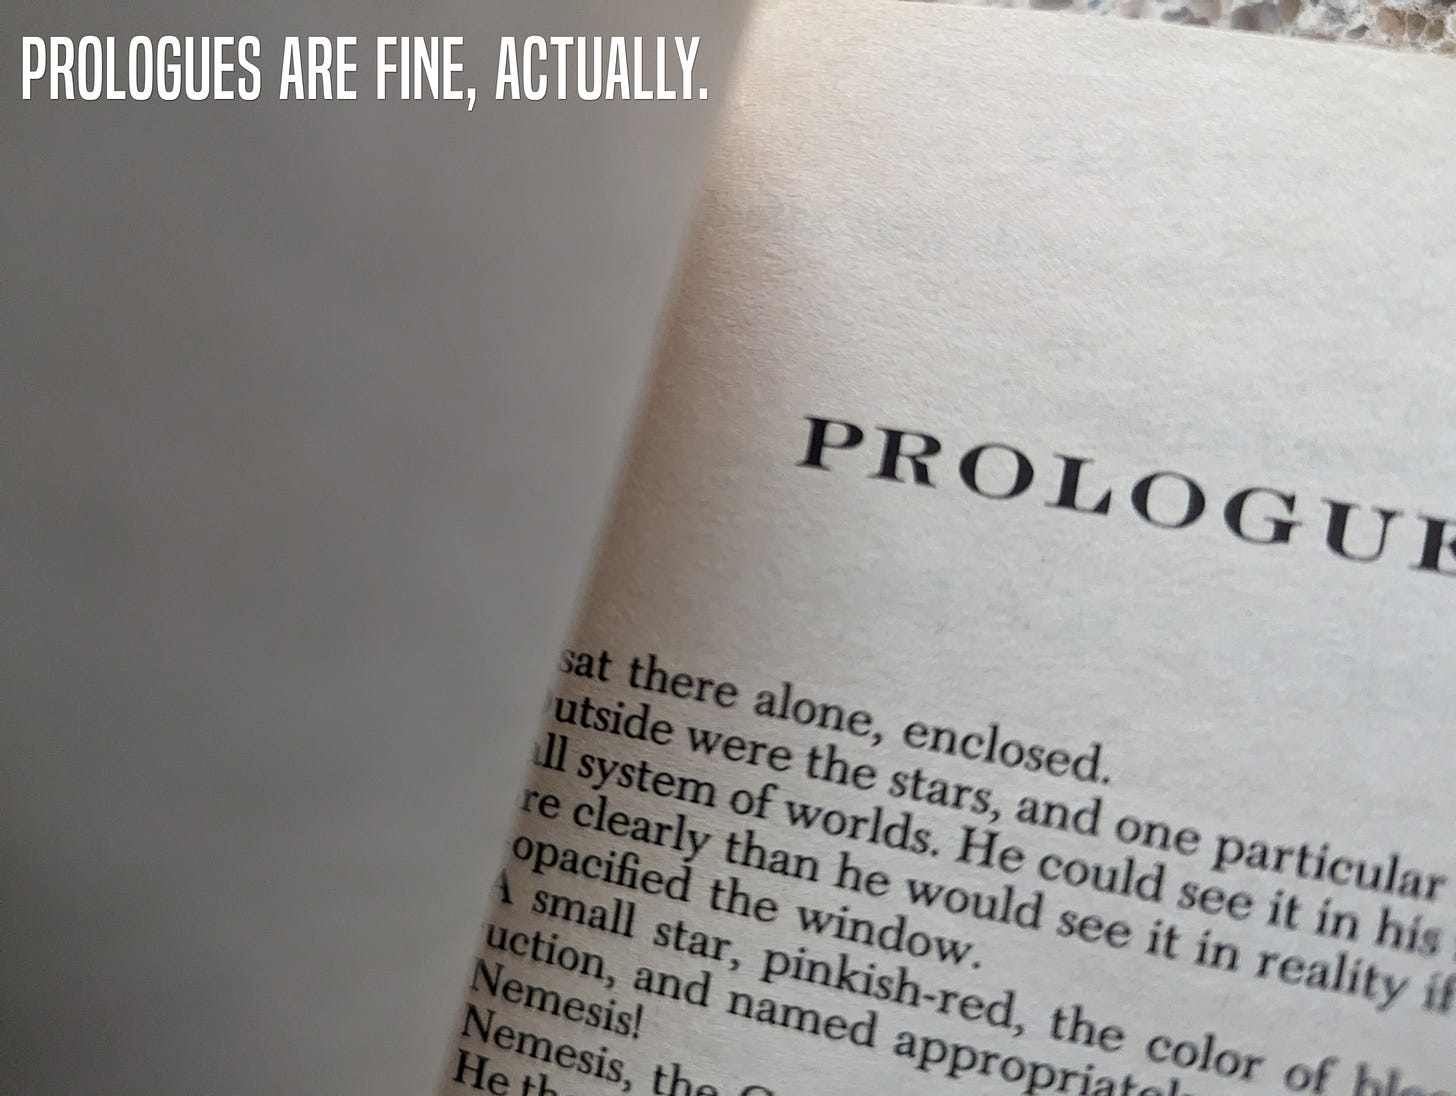 Prologues are fine, actually. Text over a photo of a prologue in a book.